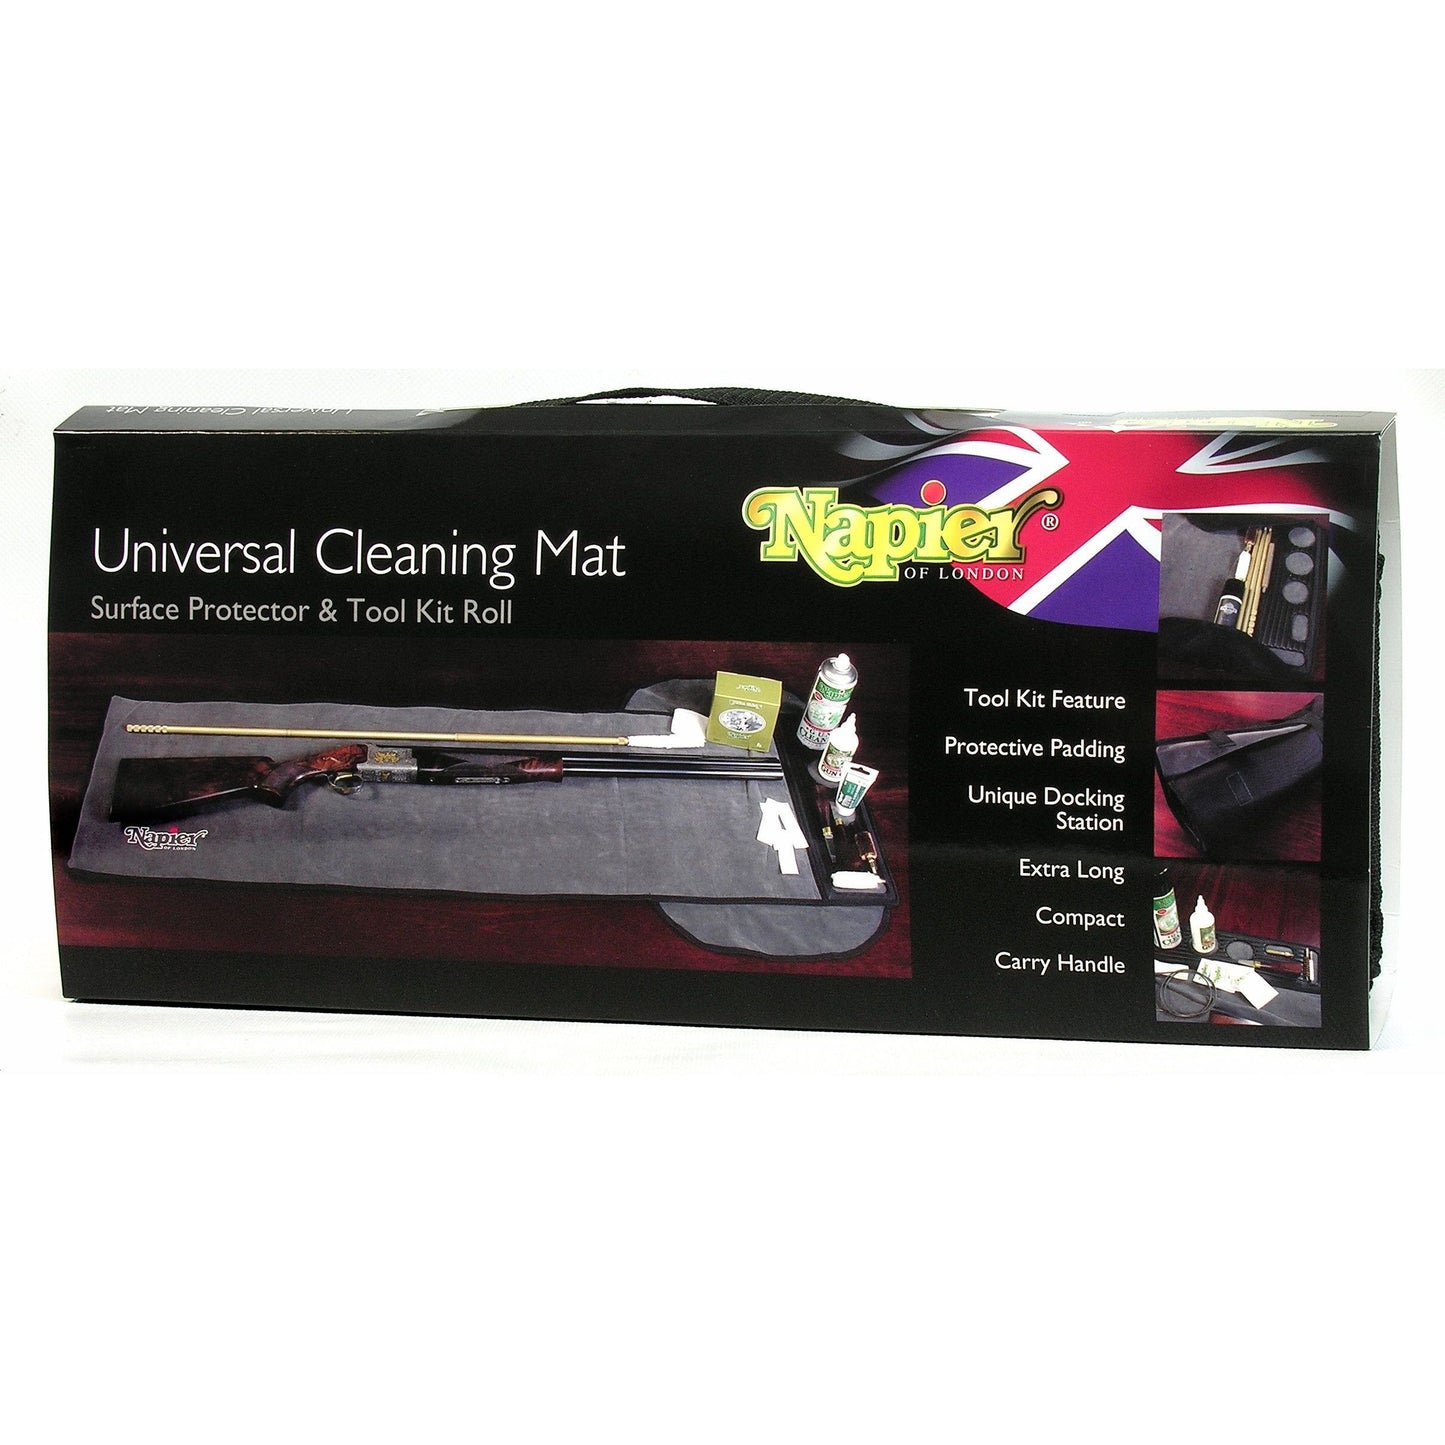 Universal Cleaning Mat